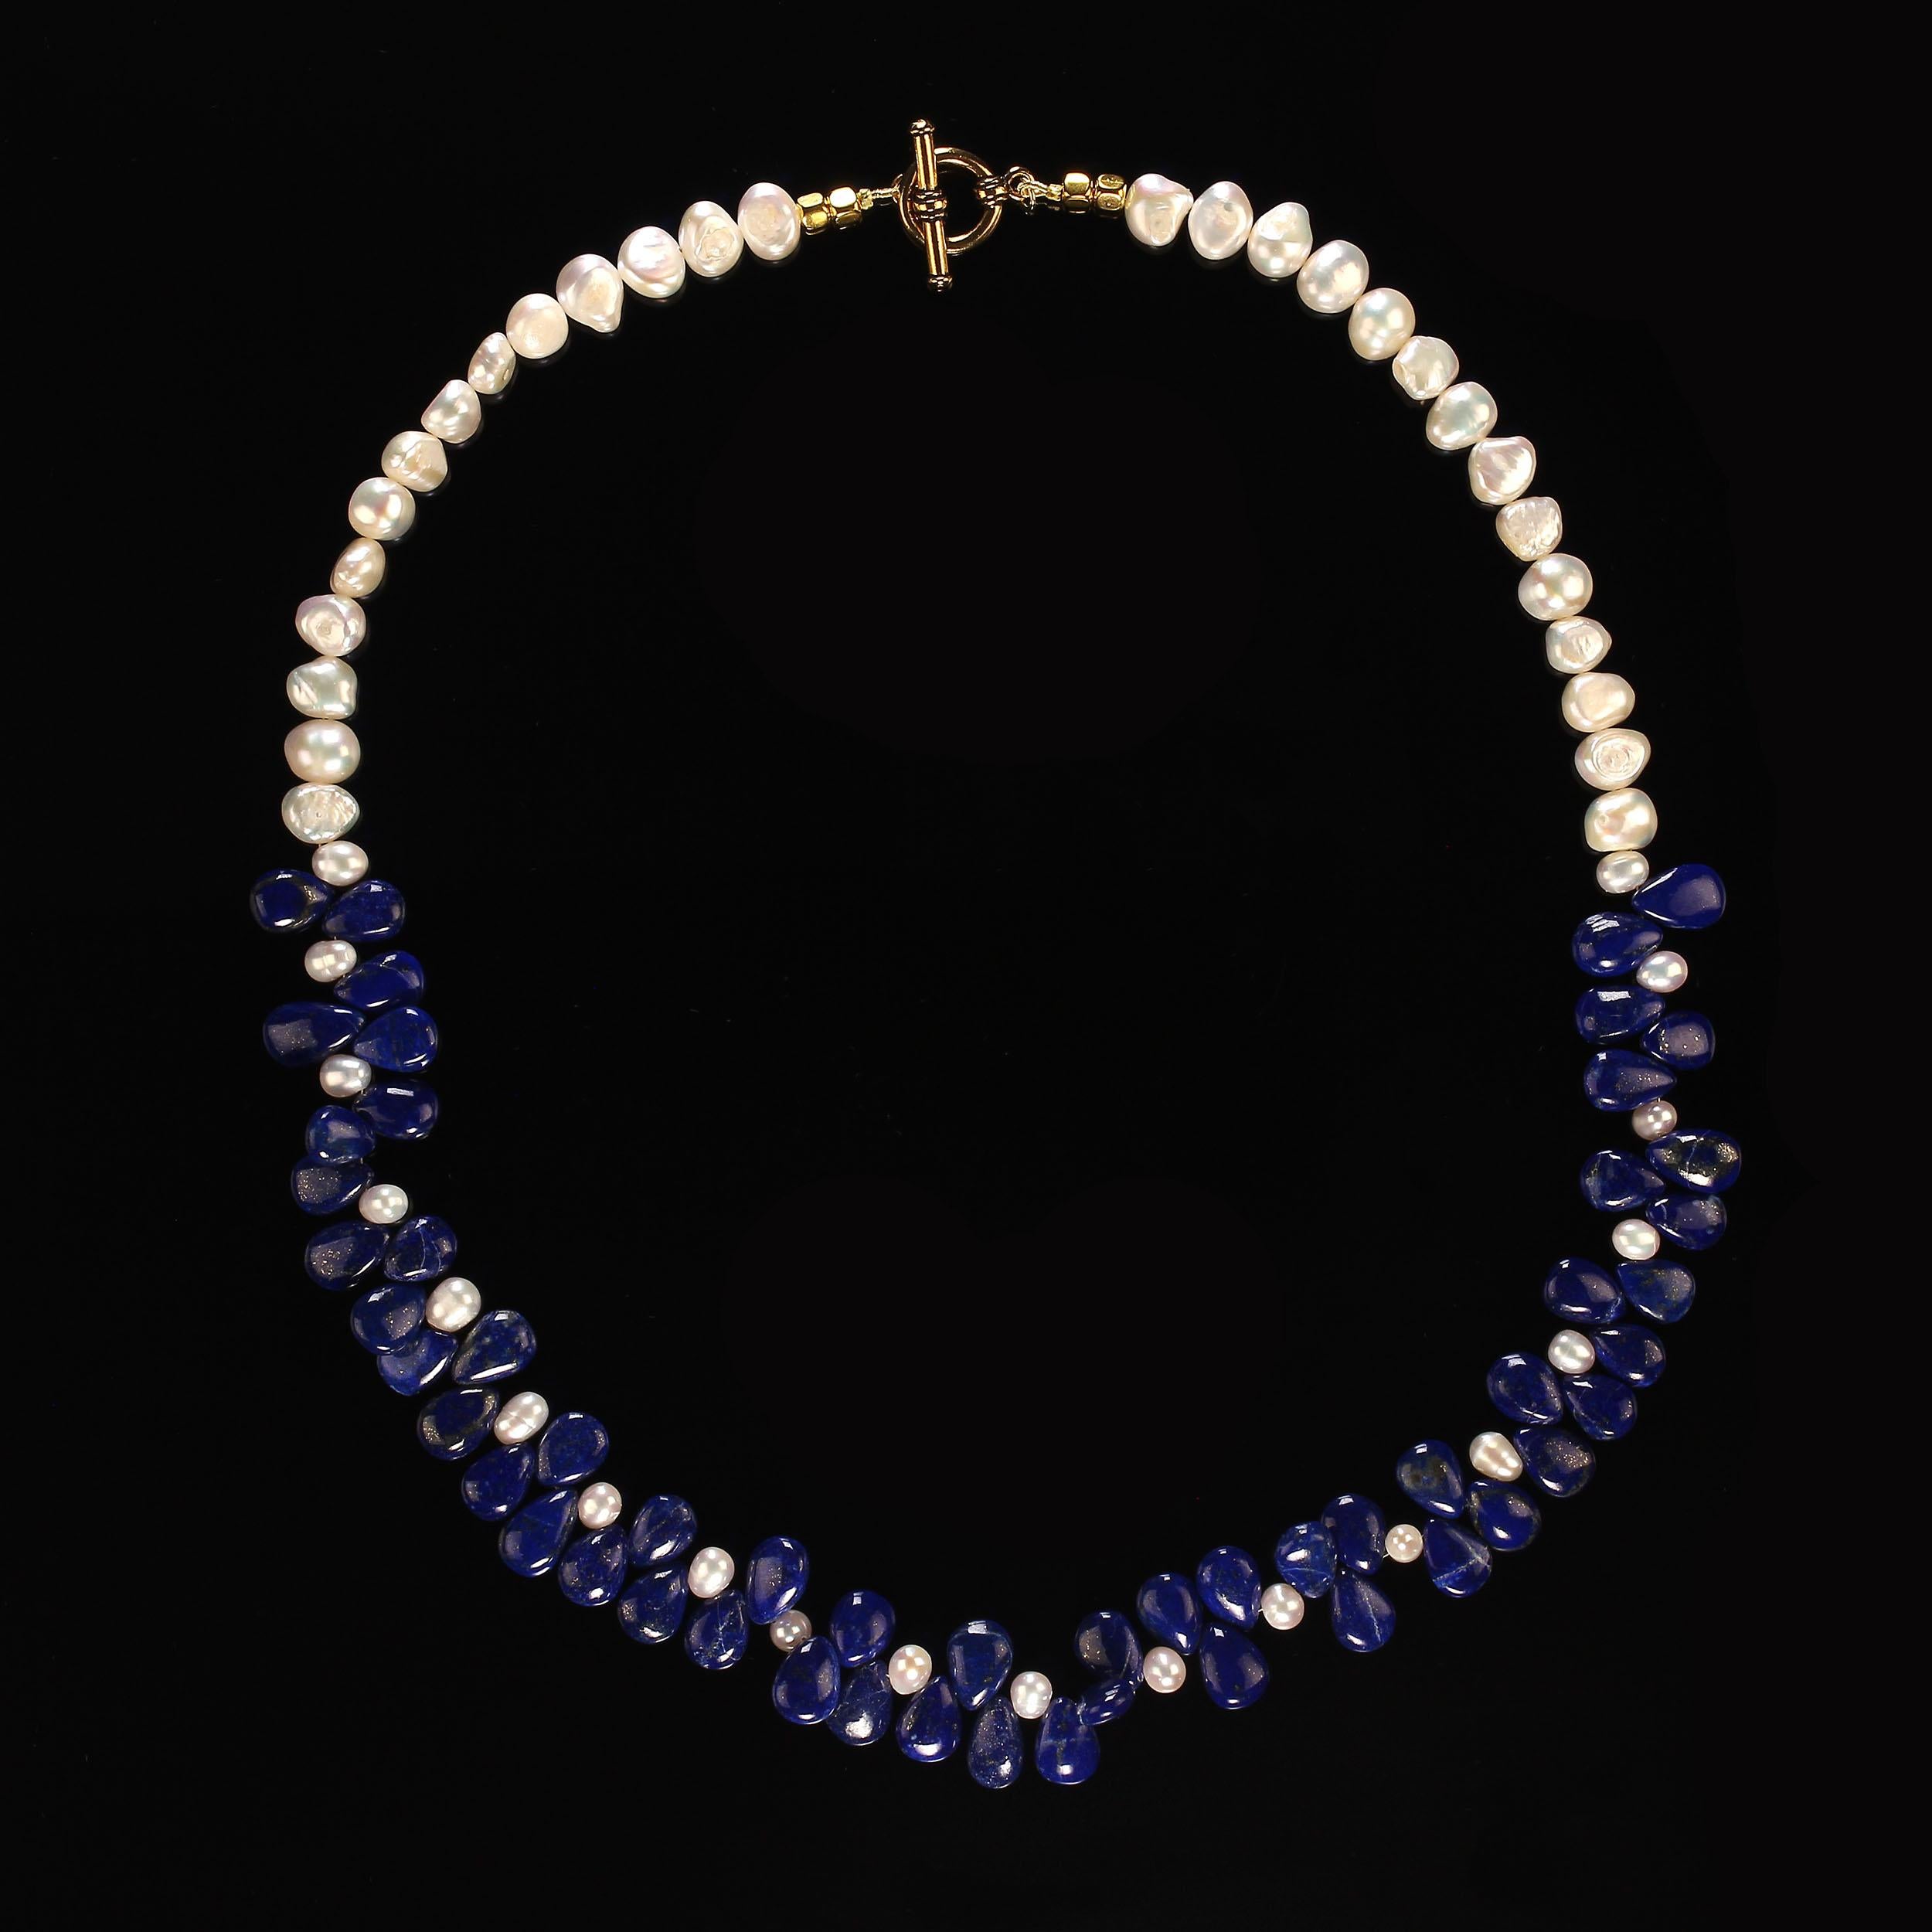 Bead AJD 20 Inch Fascinating, Unique Lapis Lazuli Briolette and White Pearl Necklace For Sale